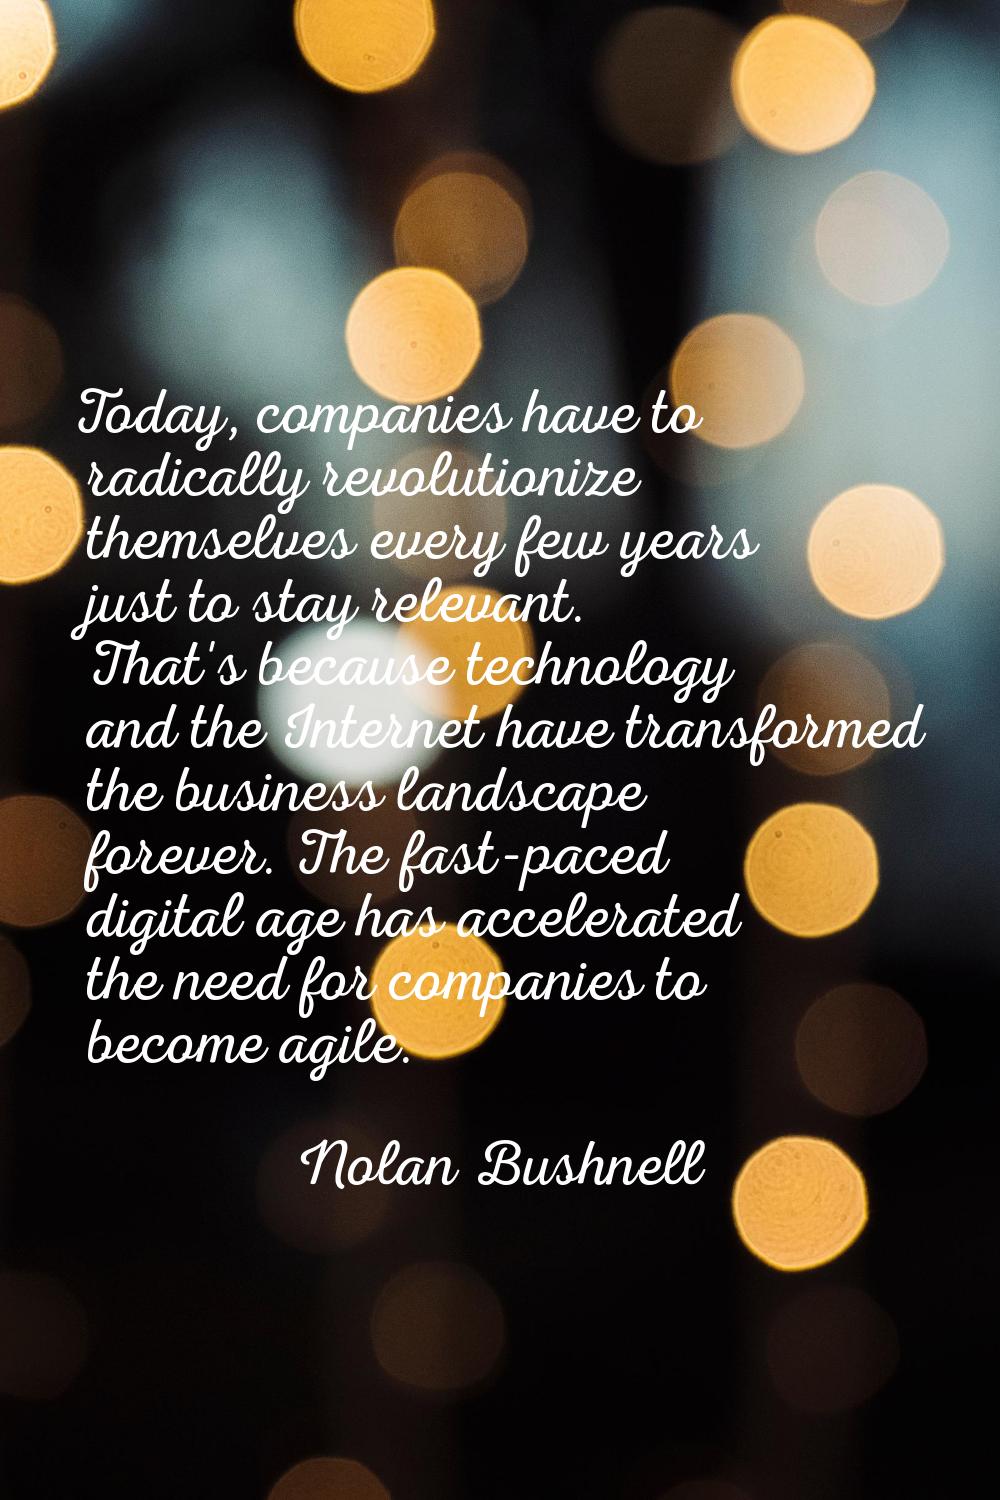 Today, companies have to radically revolutionize themselves every few years just to stay relevant. 